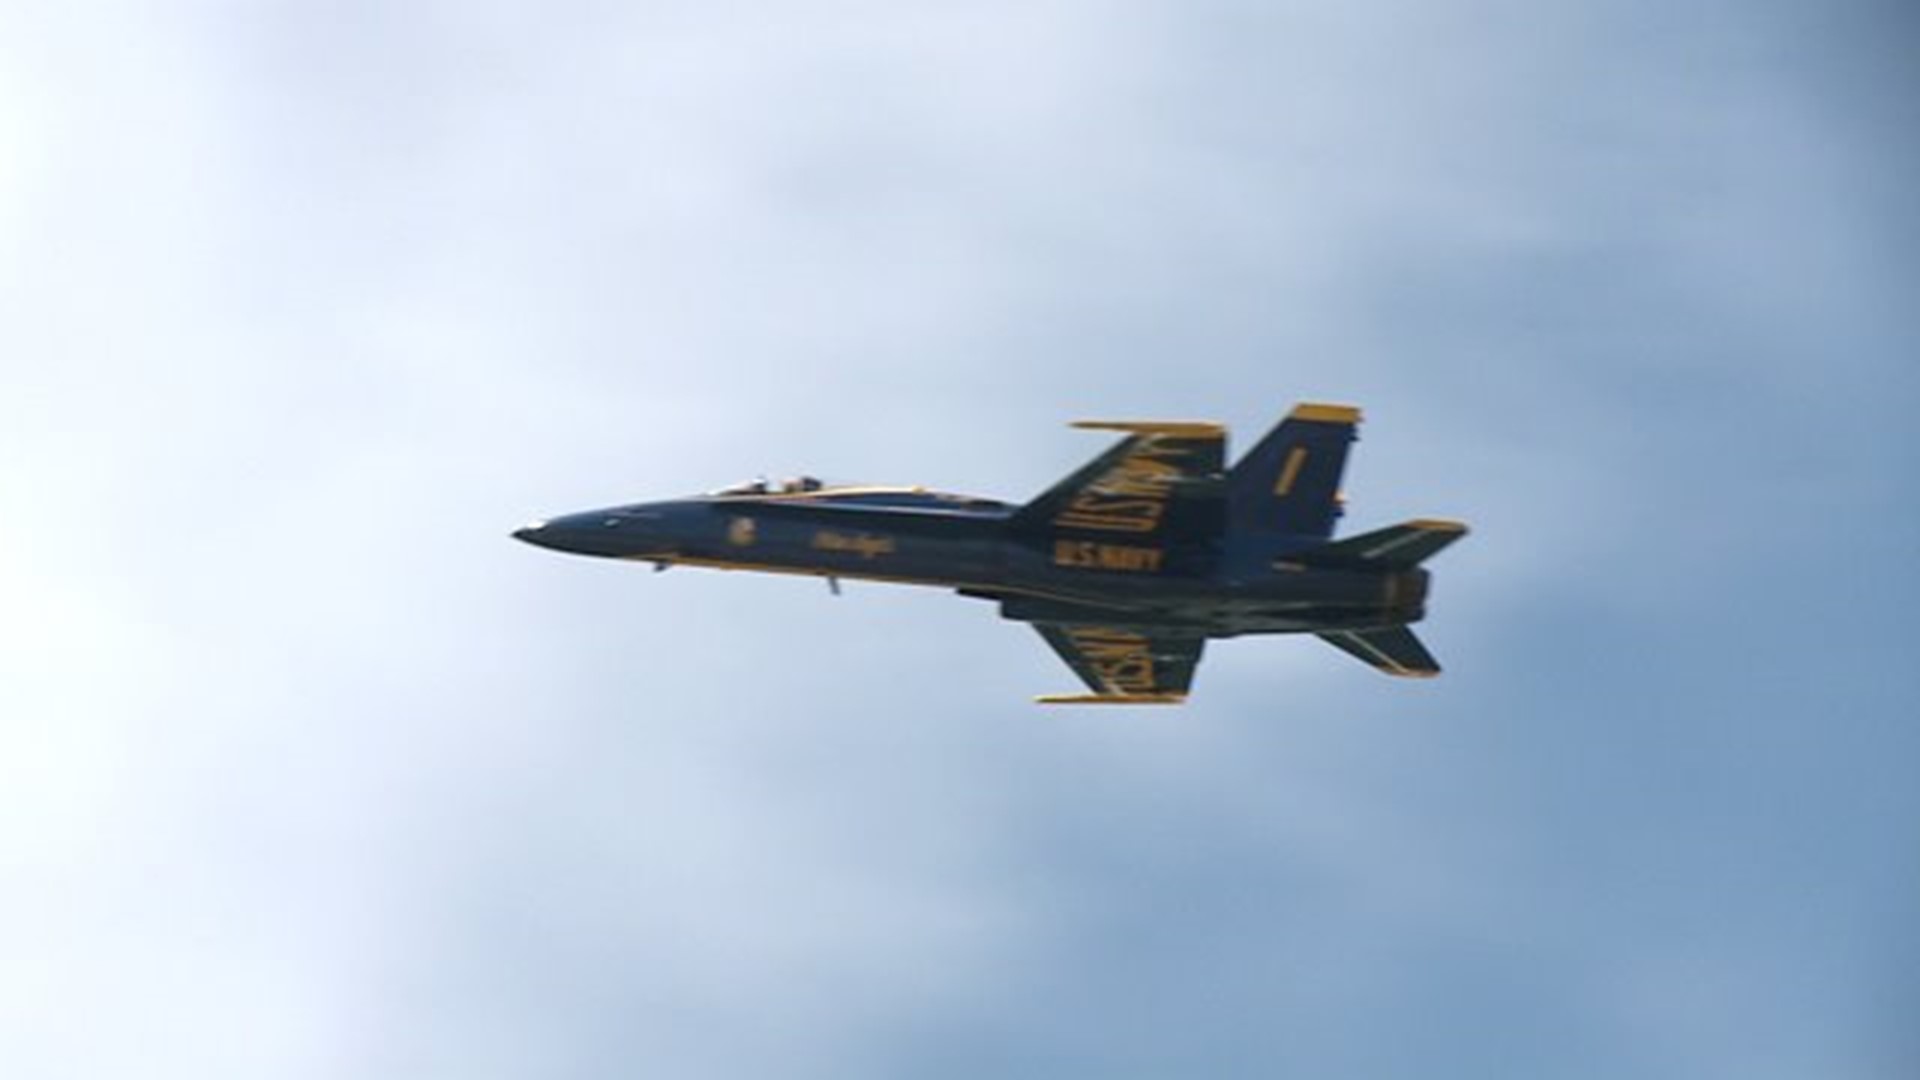 Air Show future up in the air